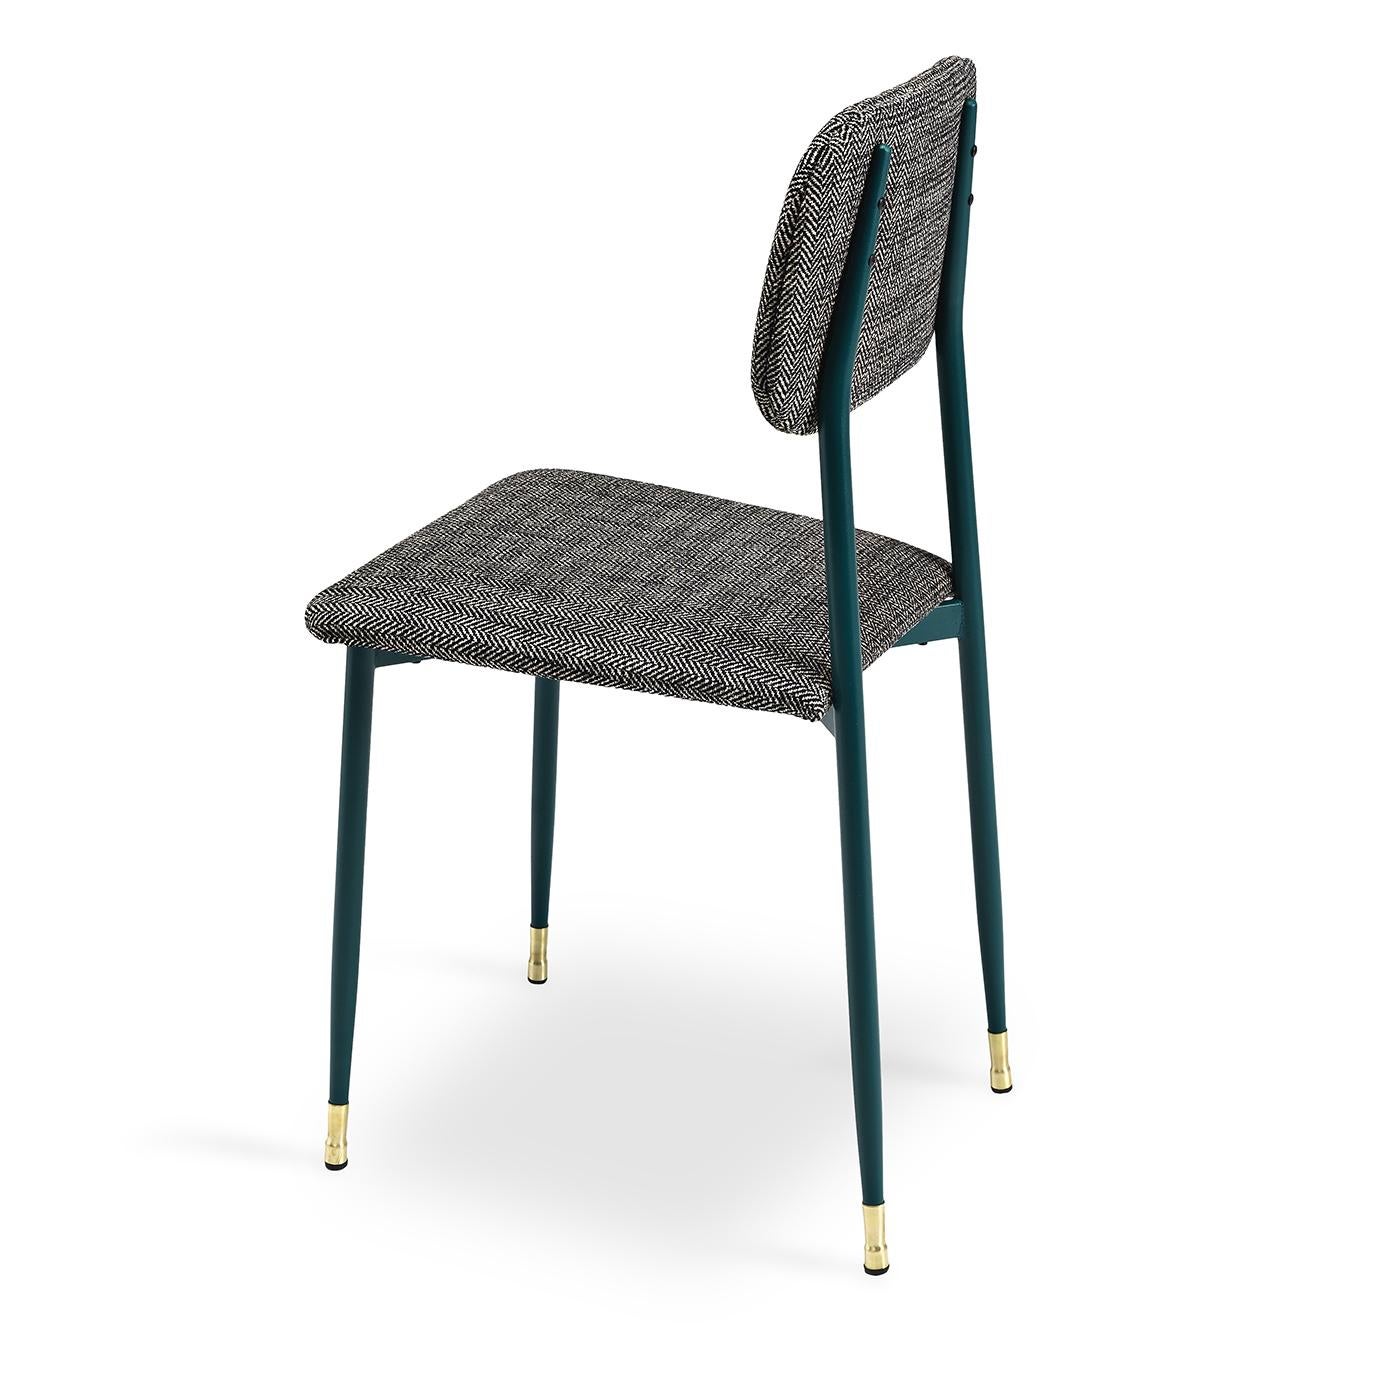 Sit around the table on this cute little dining chair with a vintage spark. The chair’s simple metal frame and legs are finished in a dark green and decorative brass chair guides complete the bottoms of the legs. The comfortable back and seat are